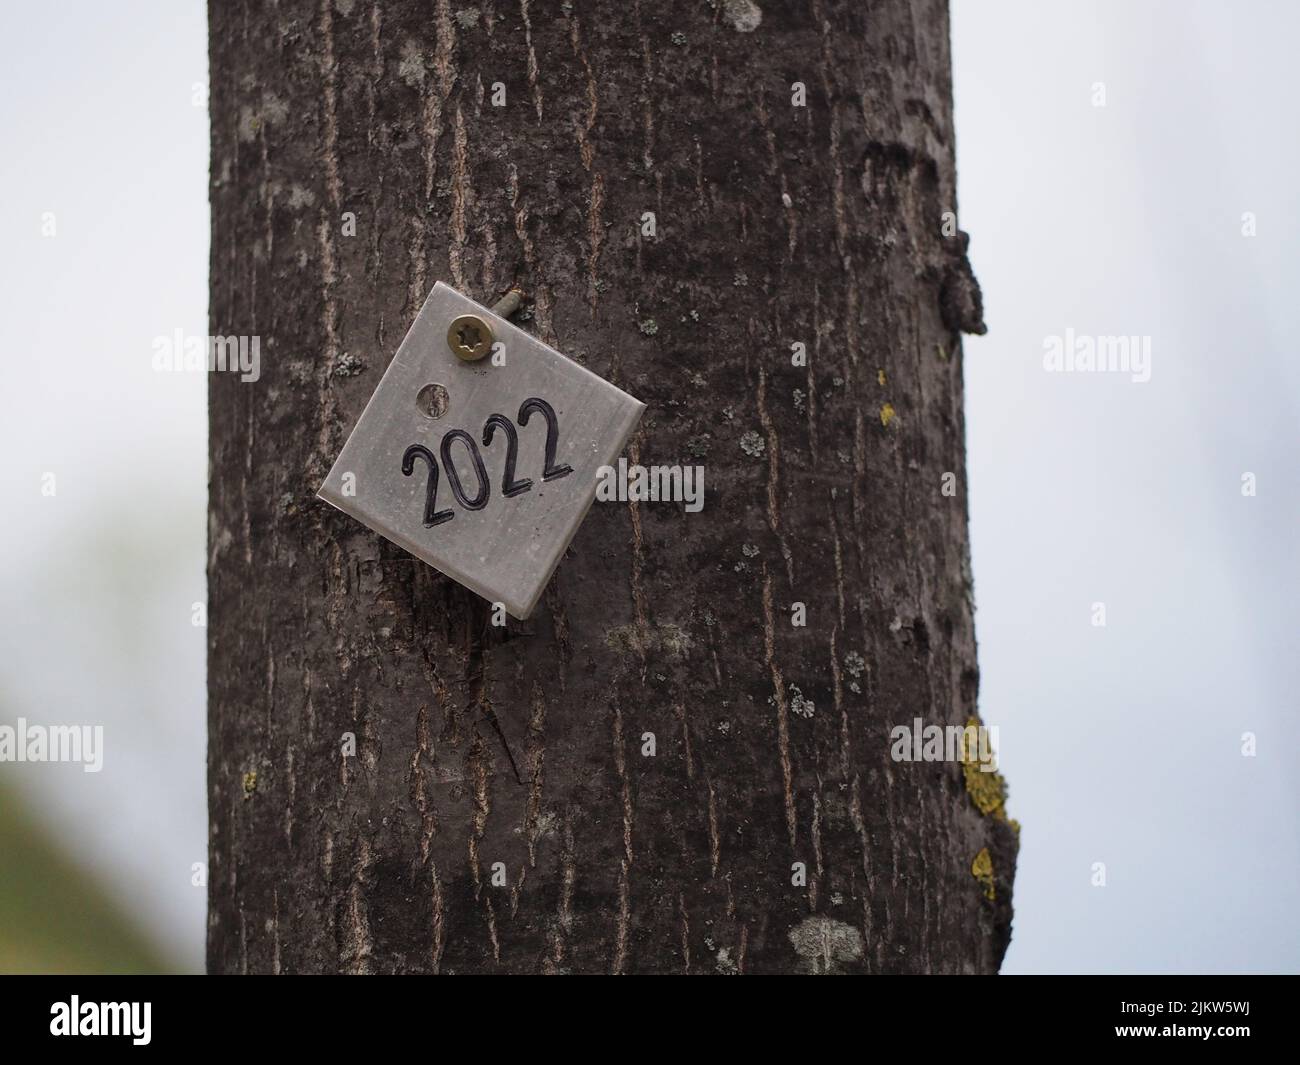 A closeup of the 2022 number written on the white piece of a square hanging on the tree stem Stock Photo